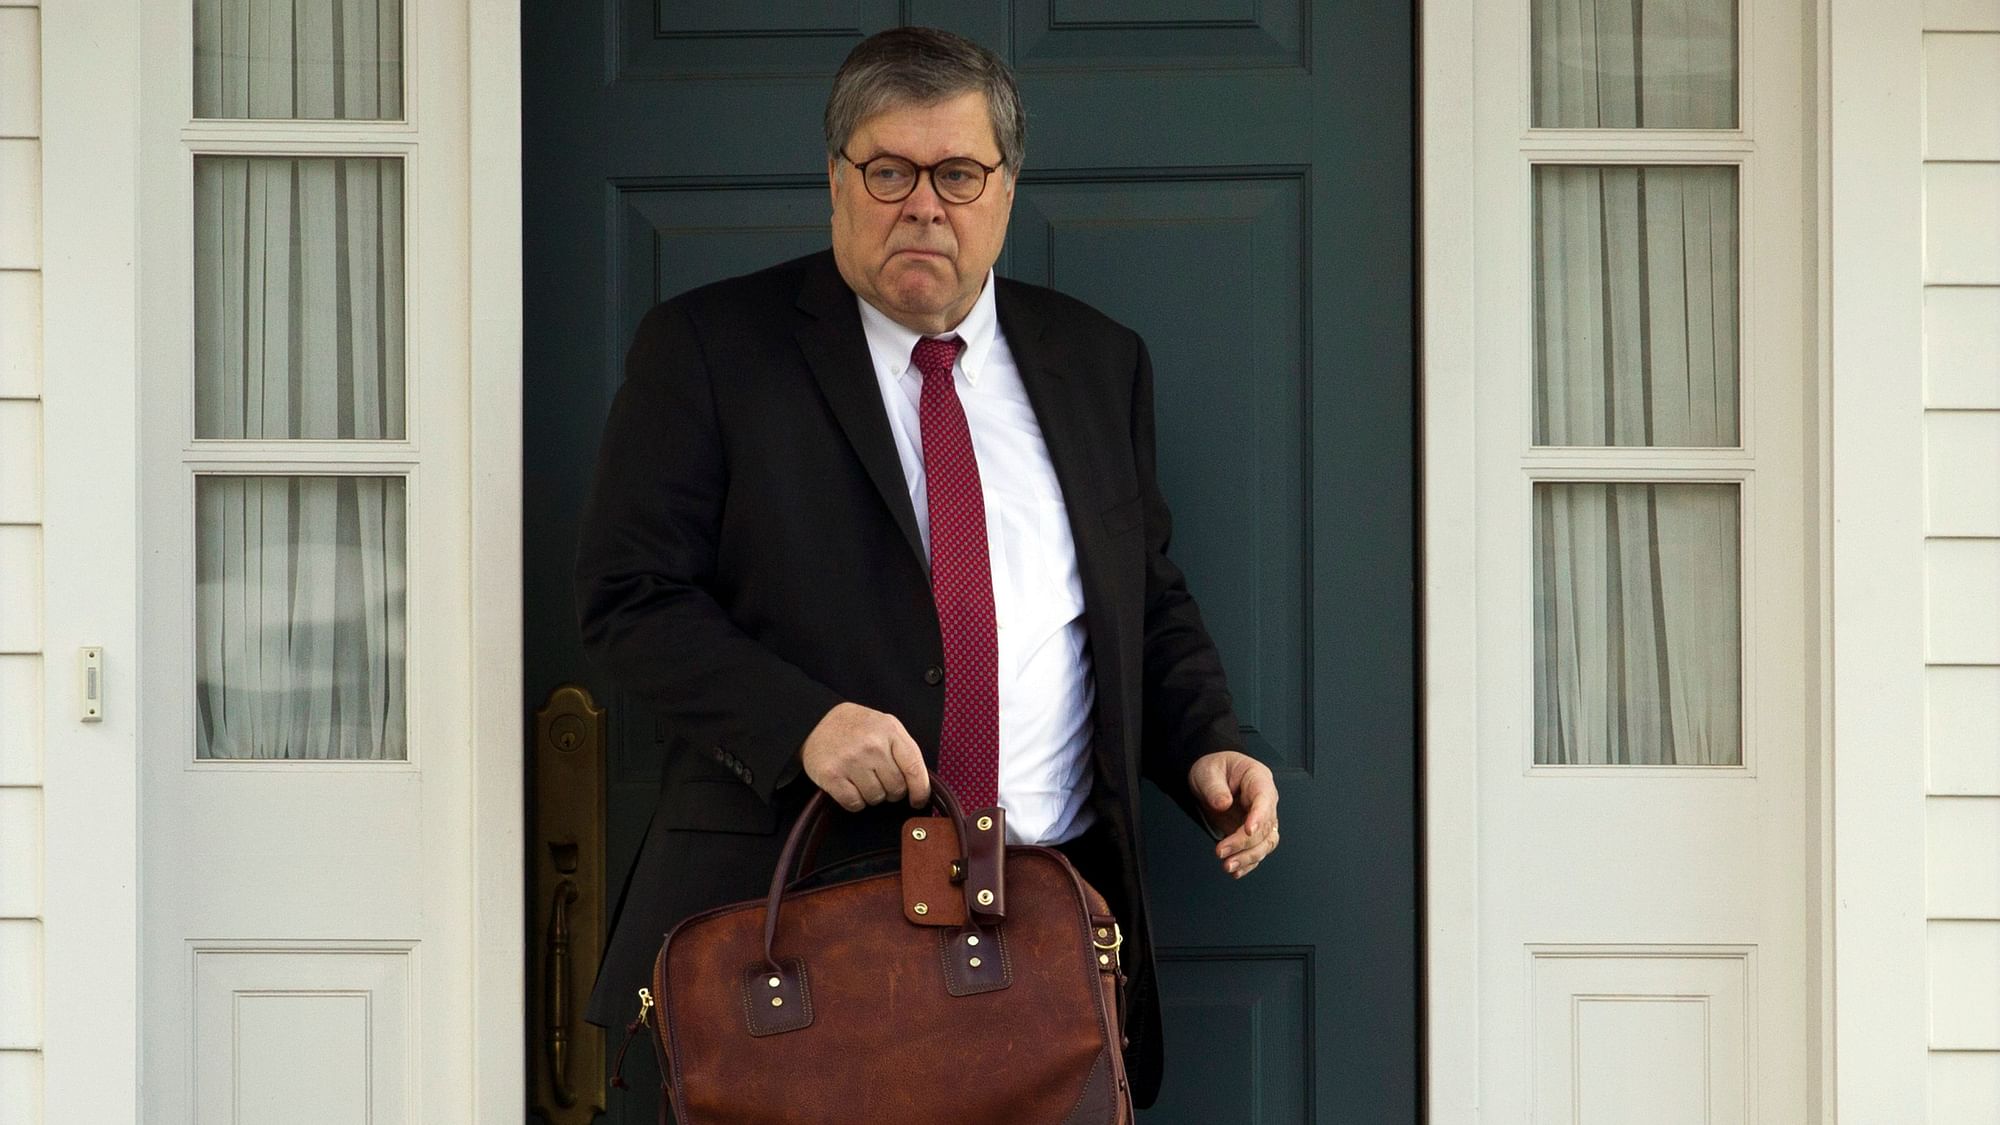 Attorney General William Barr  told Congress on 29 March, to expect version of special counsel’s Russia report by mid-April. 